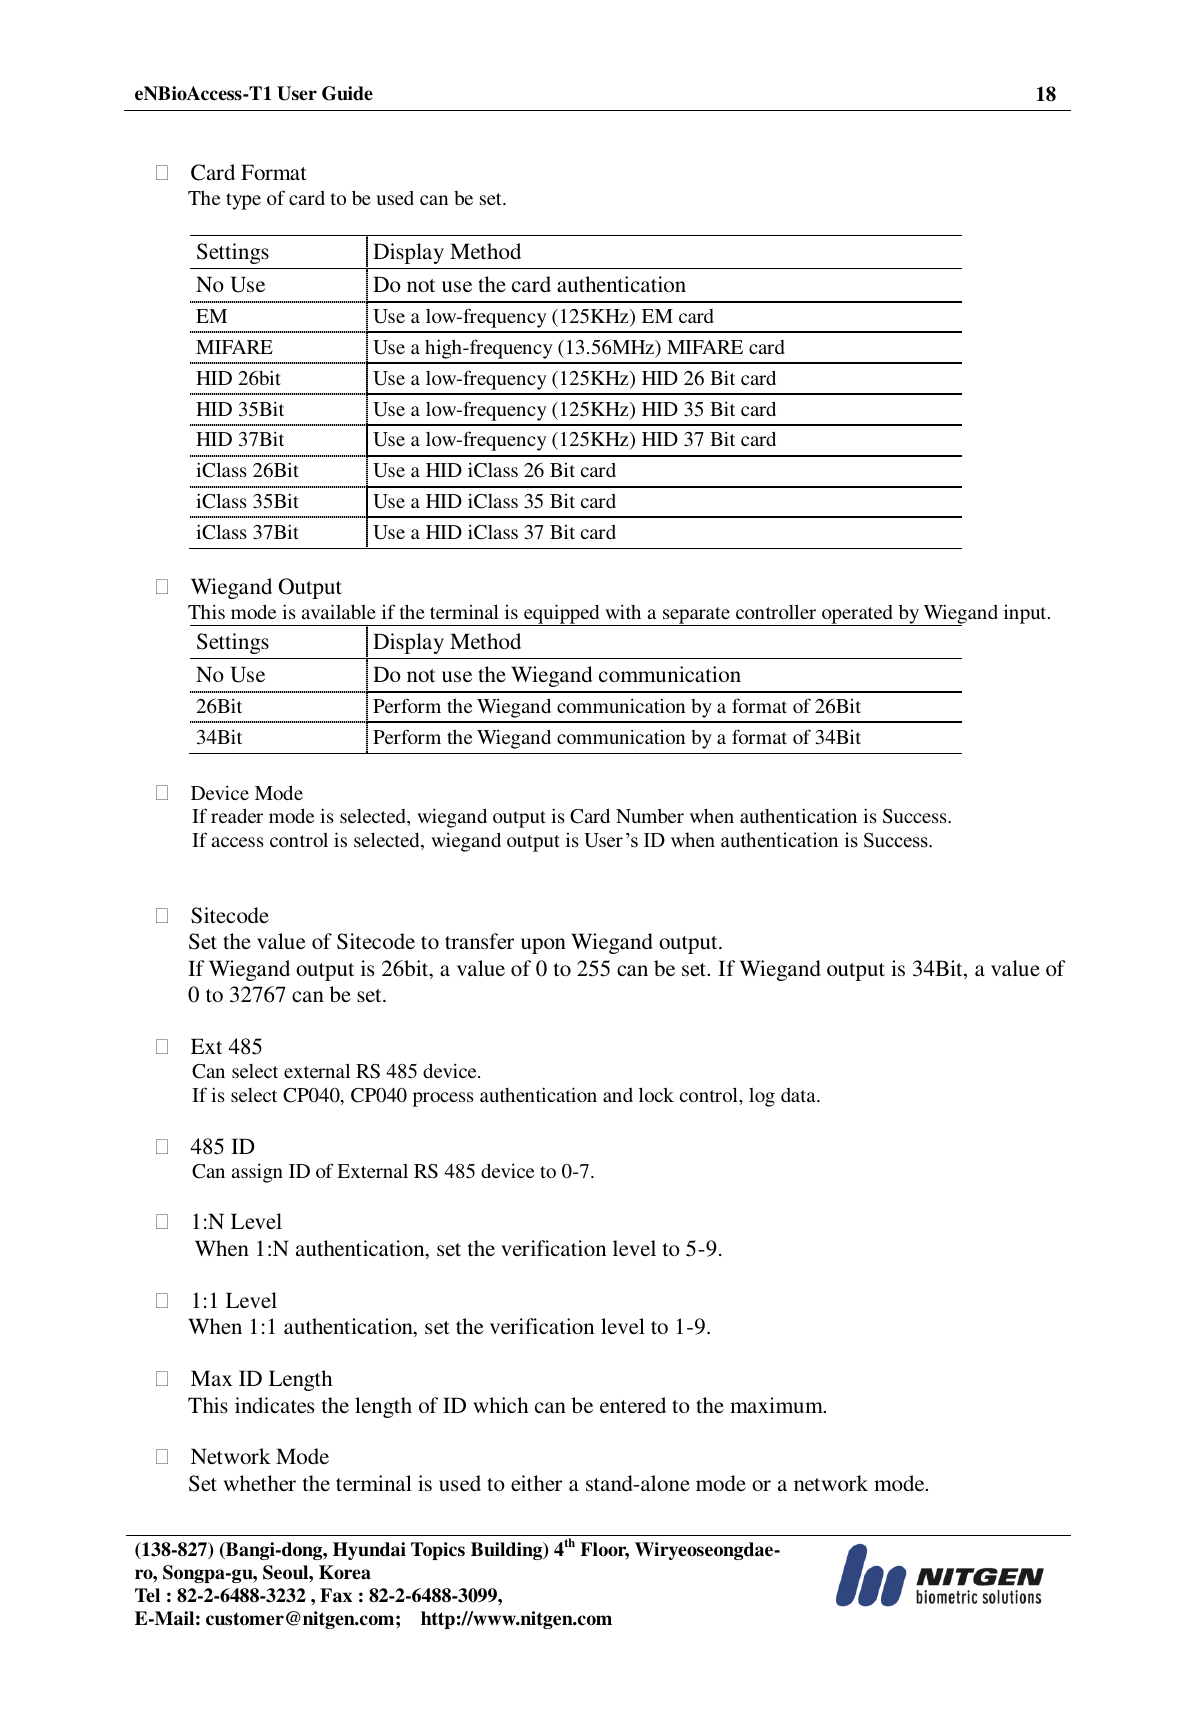  eNBioAccess-T1 User Guide 18   (138-827) (Bangi-dong, Hyundai Topics Building) 4th Floor, Wiryeoseongdae-ro, Songpa-gu, Seoul, Korea Tel : 82-2-6488-3232 , Fax : 82-2-6488-3099,   E-Mail: customer@nitgen.com;    http://www.nitgen.com     Card Format The type of card to be used can be set.  Settings Display Method No Use Do not use the card authentication EM Use a low-frequency (125KHz) EM card MIFARE Use a high-frequency (13.56MHz) MIFARE card HID 26bit Use a low-frequency (125KHz) HID 26 Bit card HID 35Bit Use a low-frequency (125KHz) HID 35 Bit card HID 37Bit Use a low-frequency (125KHz) HID 37 Bit card iClass 26Bit Use a HID iClass 26 Bit card iClass 35Bit Use a HID iClass 35 Bit card iClass 37Bit Use a HID iClass 37 Bit card   Wiegand Output This mode is available if the terminal is equipped with a separate controller operated by Wiegand input. Settings Display Method No Use Do not use the Wiegand communication 26Bit Perform the Wiegand communication by a format of 26Bit 34Bit Perform the Wiegand communication by a format of 34Bit   Device Mode If reader mode is selected, wiegand output is Card Number when authentication is Success. If access control is selected, wiegand output is User’s ID when authentication is Success.    Sitecode Set the value of Sitecode to transfer upon Wiegand output. If Wiegand output is 26bit, a value of 0 to 255 can be set. If Wiegand output is 34Bit, a value of 0 to 32767 can be set.   Ext 485 Can select external RS 485 device.   If is select CP040, CP040 process authentication and lock control, log data.   485 ID Can assign ID of External RS 485 device to 0-7.   1:N Level When 1:N authentication, set the verification level to 5-9.   1:1 Level When 1:1 authentication, set the verification level to 1-9.   Max ID Length This indicates the length of ID which can be entered to the maximum.   Network Mode Set whether the terminal is used to either a stand-alone mode or a network mode.  